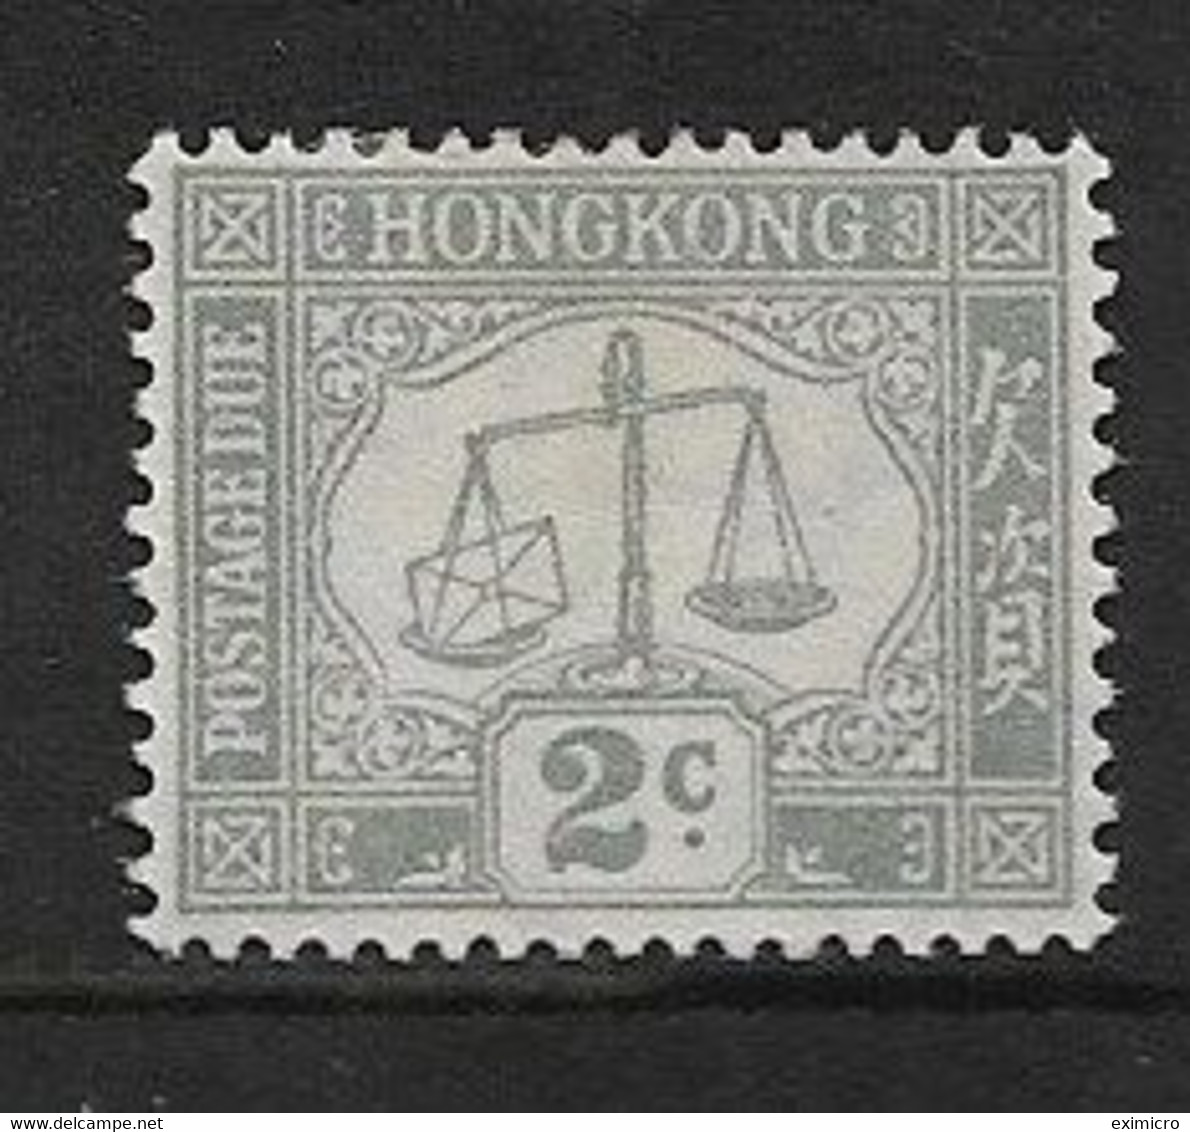 HONG KONG 1938 2c POSTAGE DUE SG D6 MOUNTED MINT Cat £7 - Impuestos